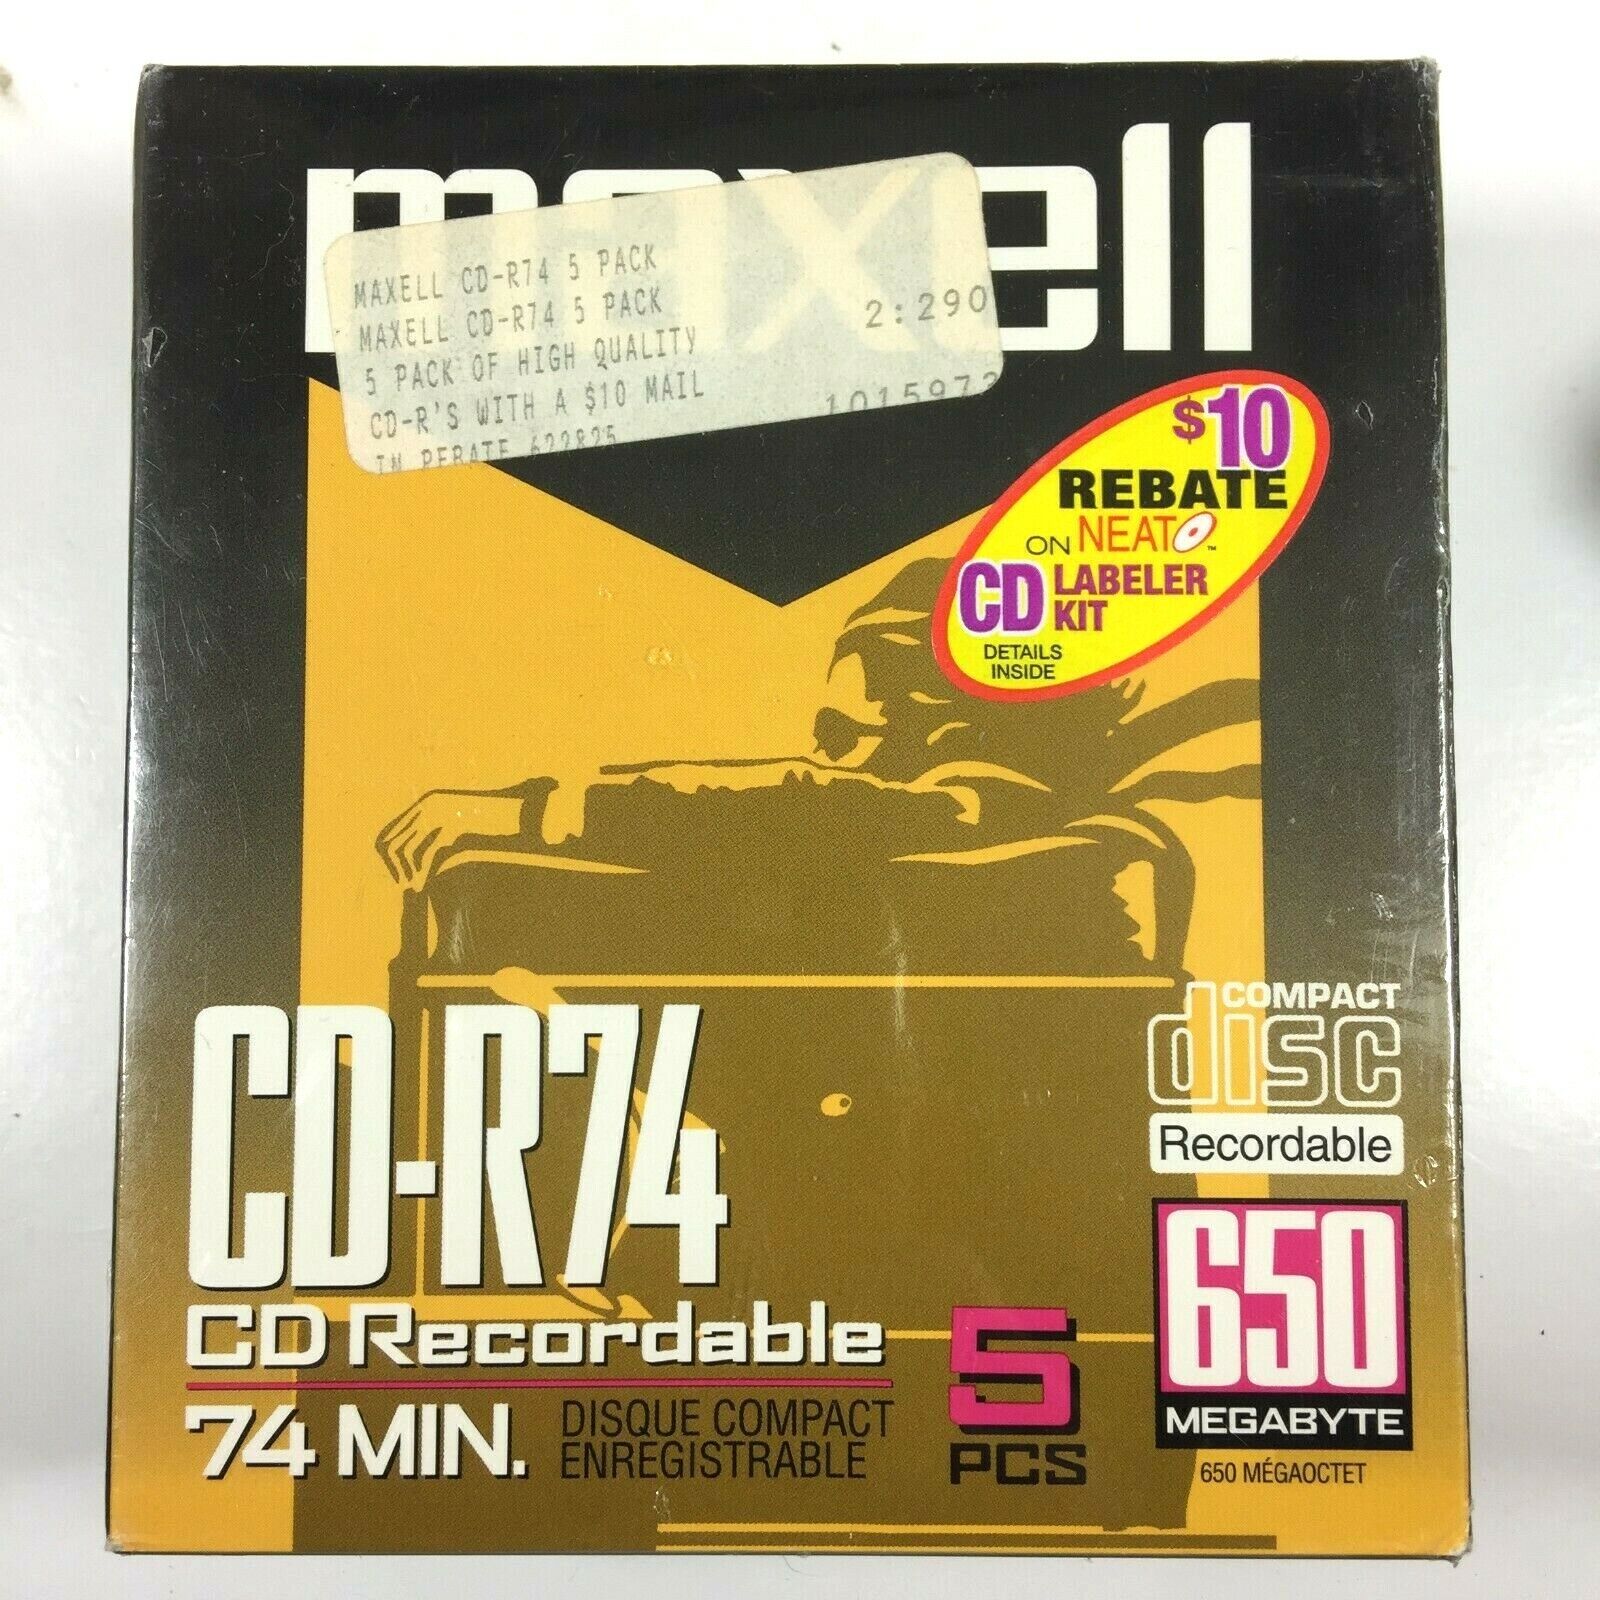 Maxell Digital Media CD-R 74-Minute (5-Pack) Recordable 650 MB - NEW